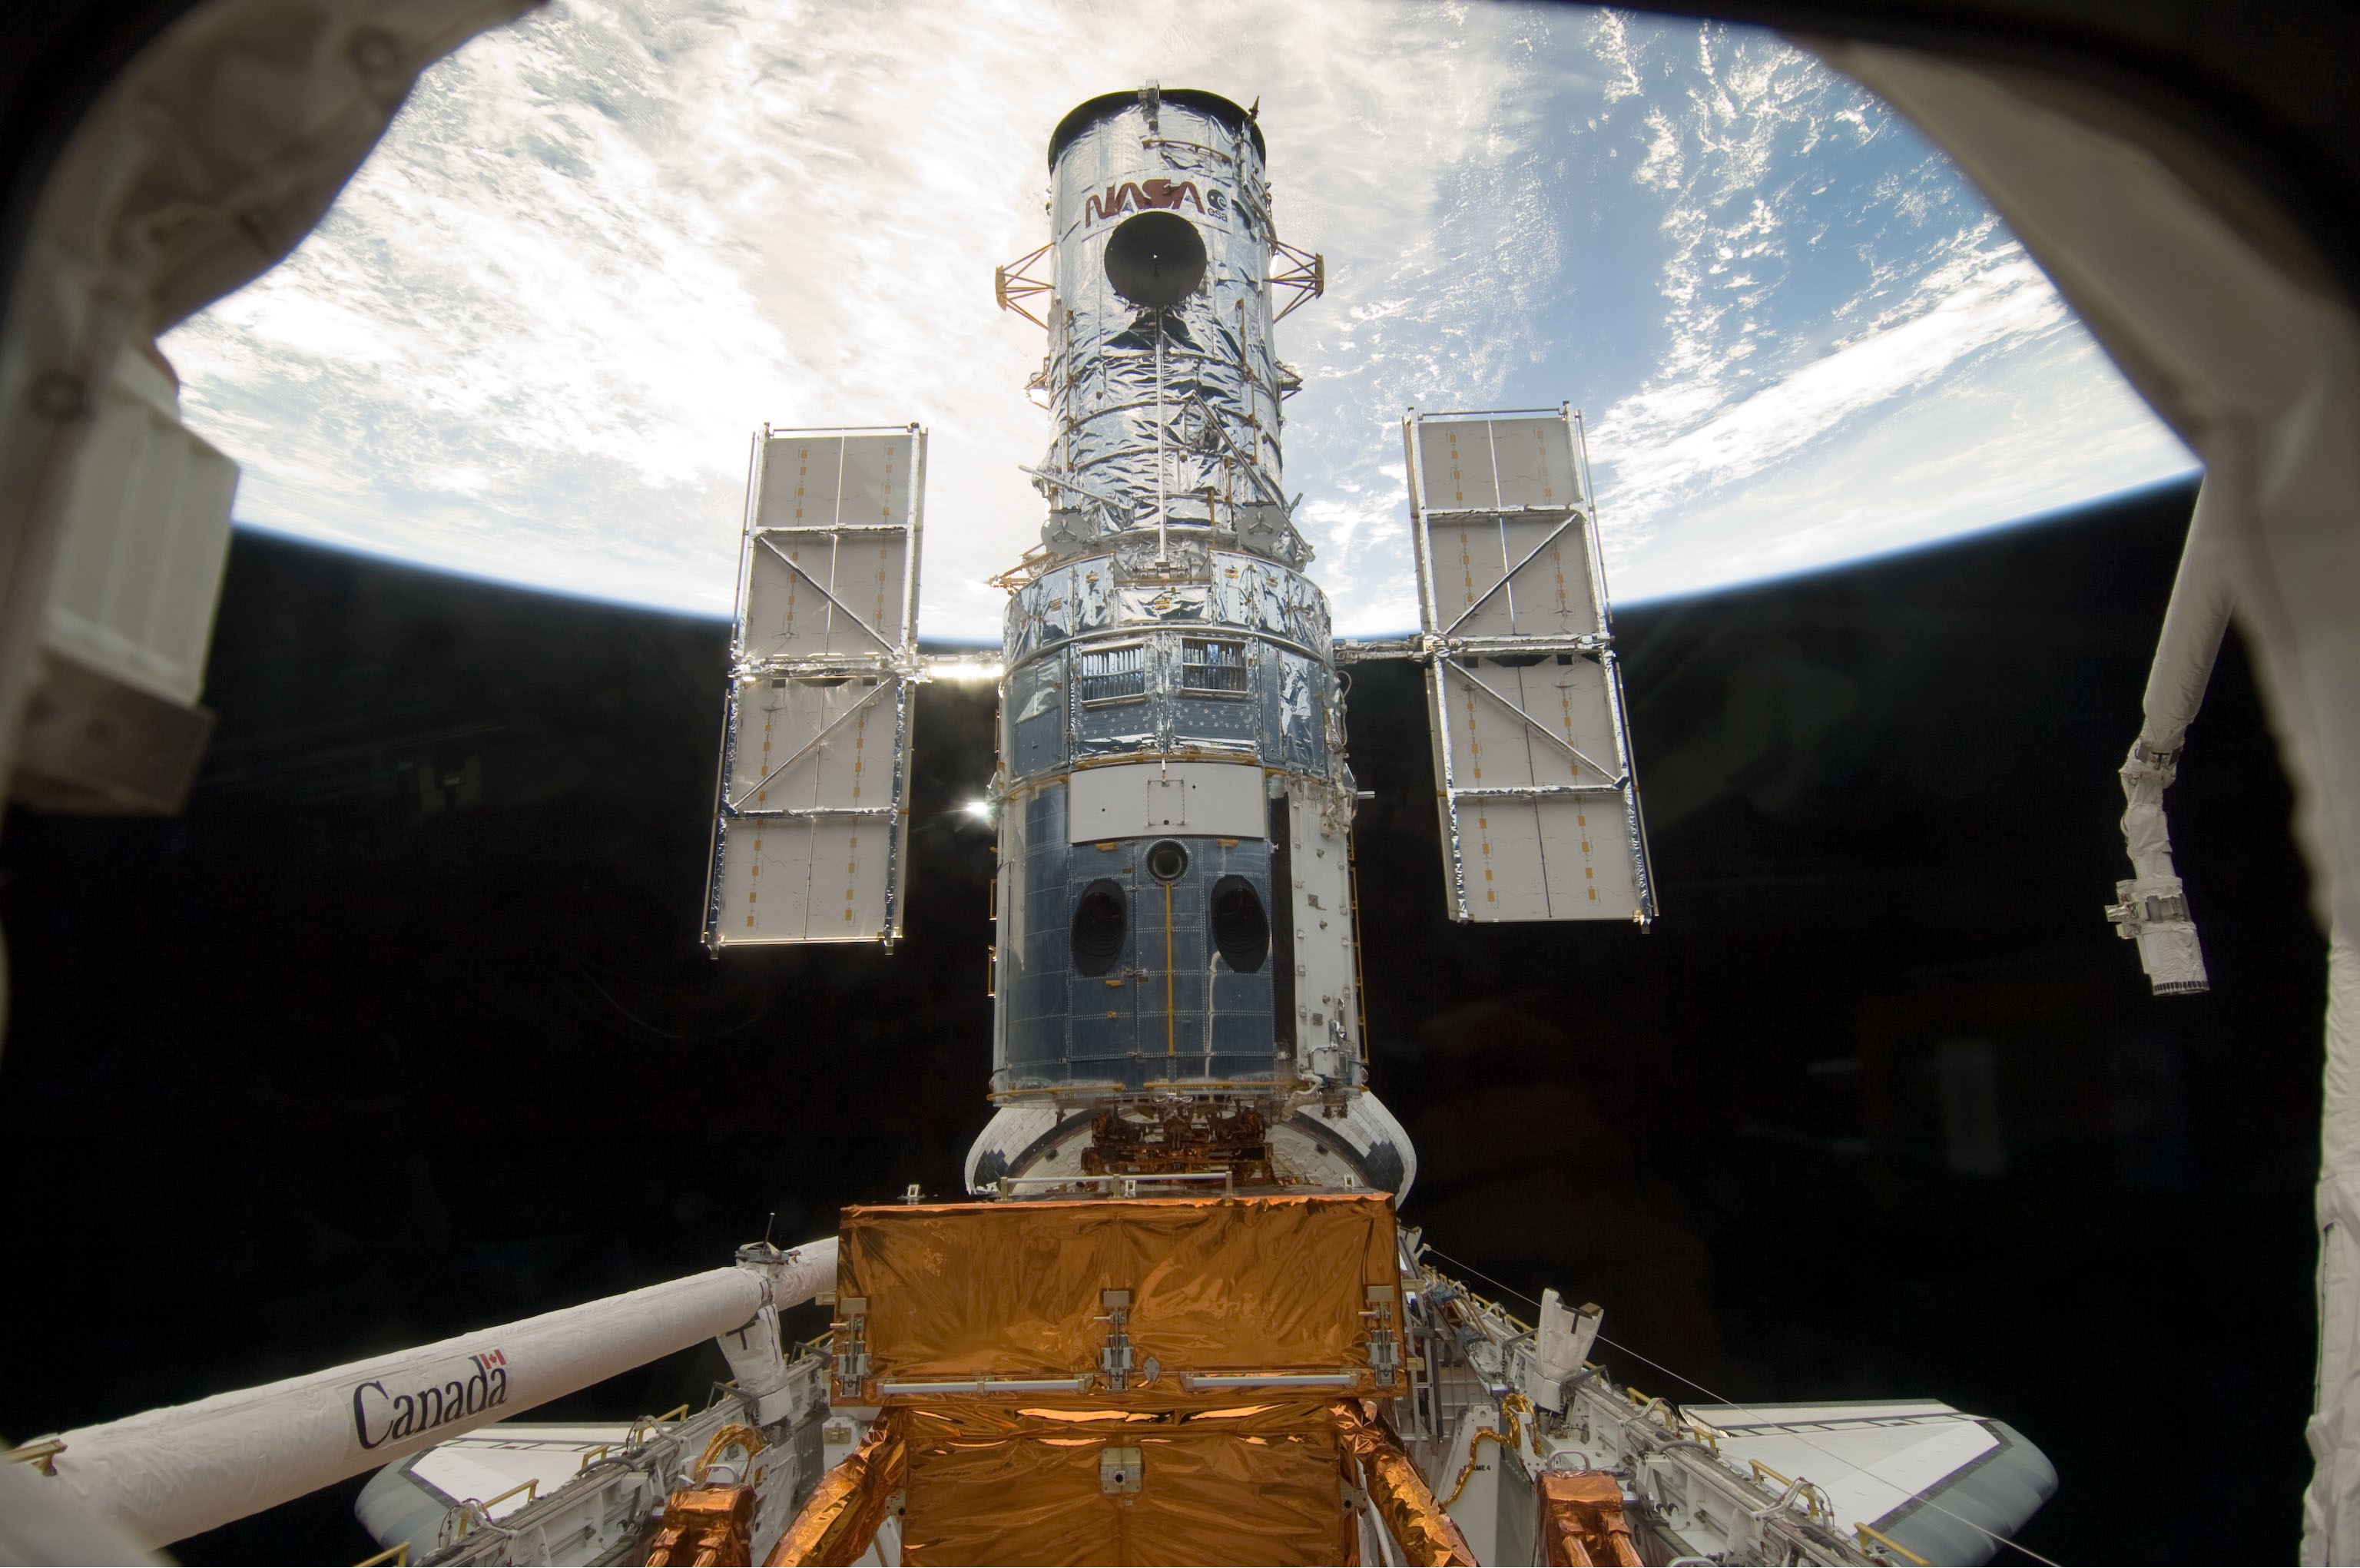 Hubble secured in Atlantis’ payload bay